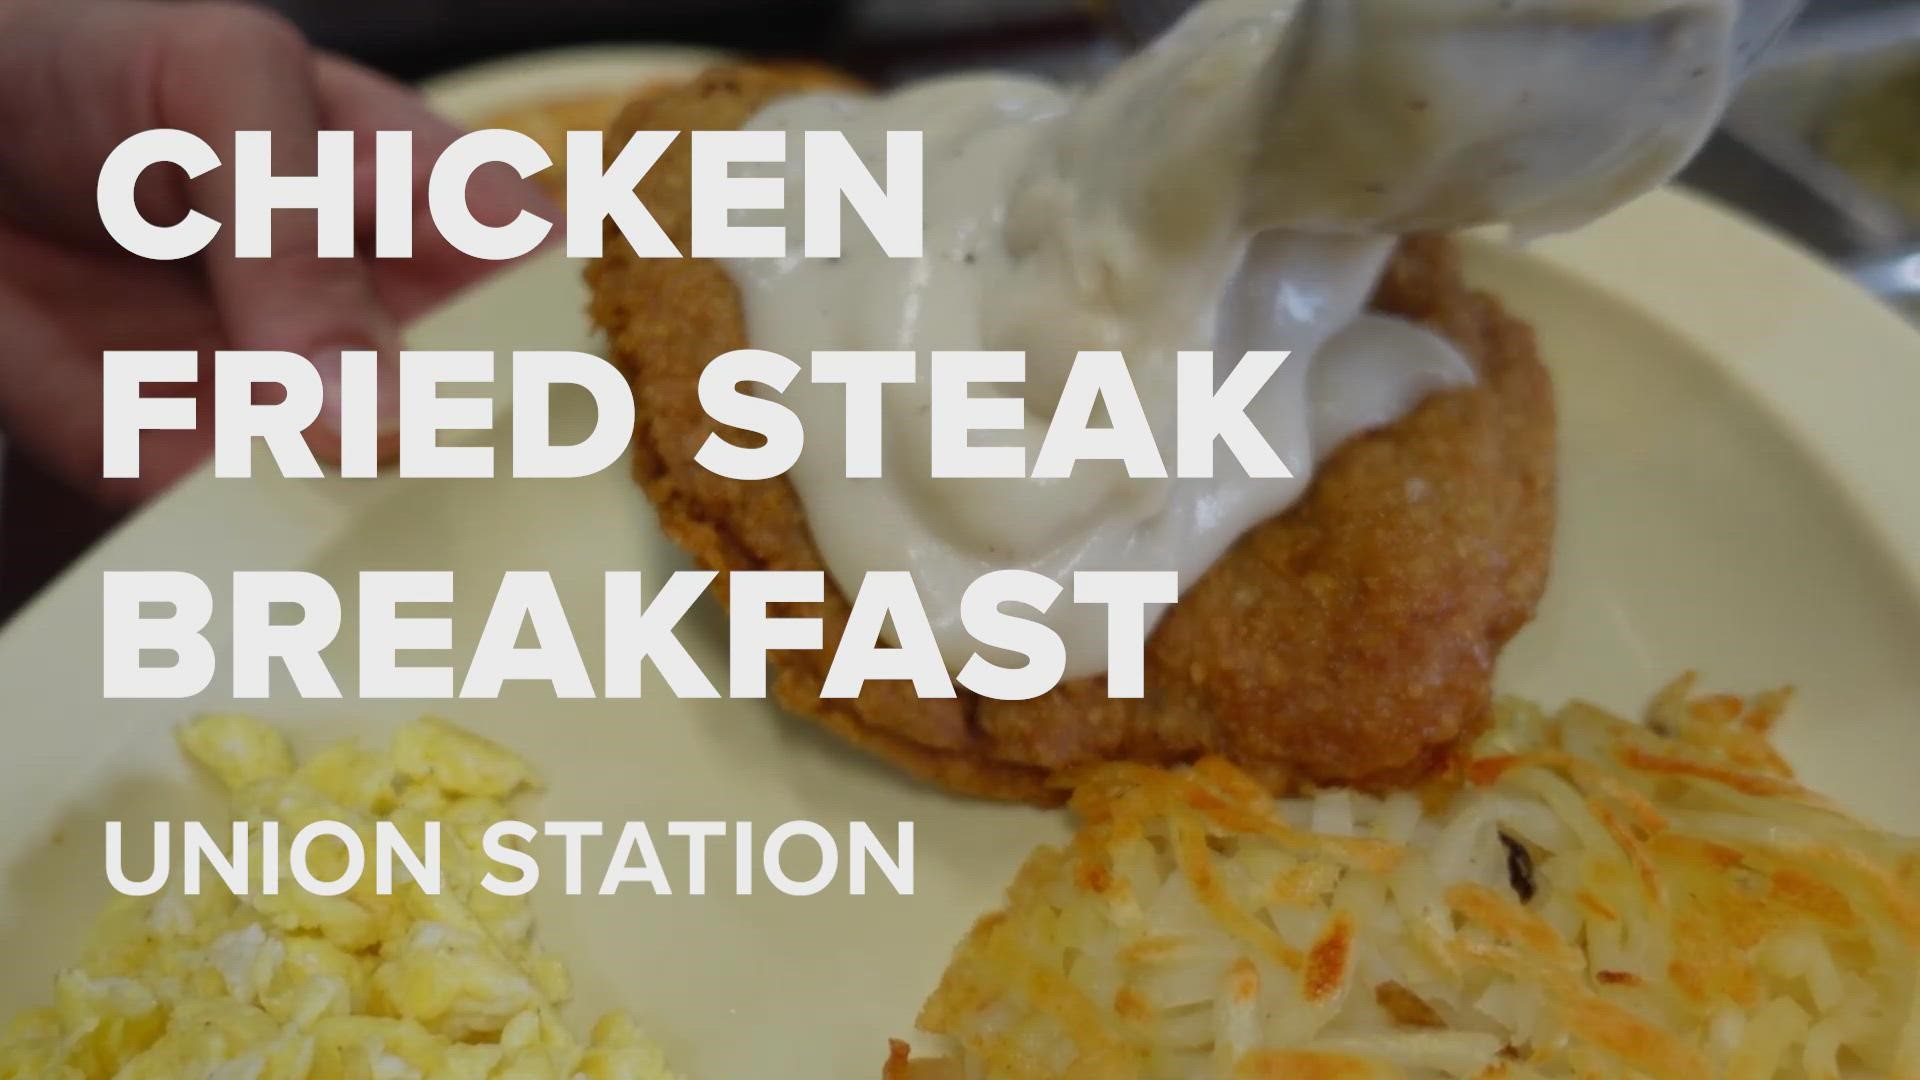 Want to find more meals for under $10 in the San Antonio area? Tune into KENS 5 Monday at 10 p.m. for "Ten Meals Under $10."